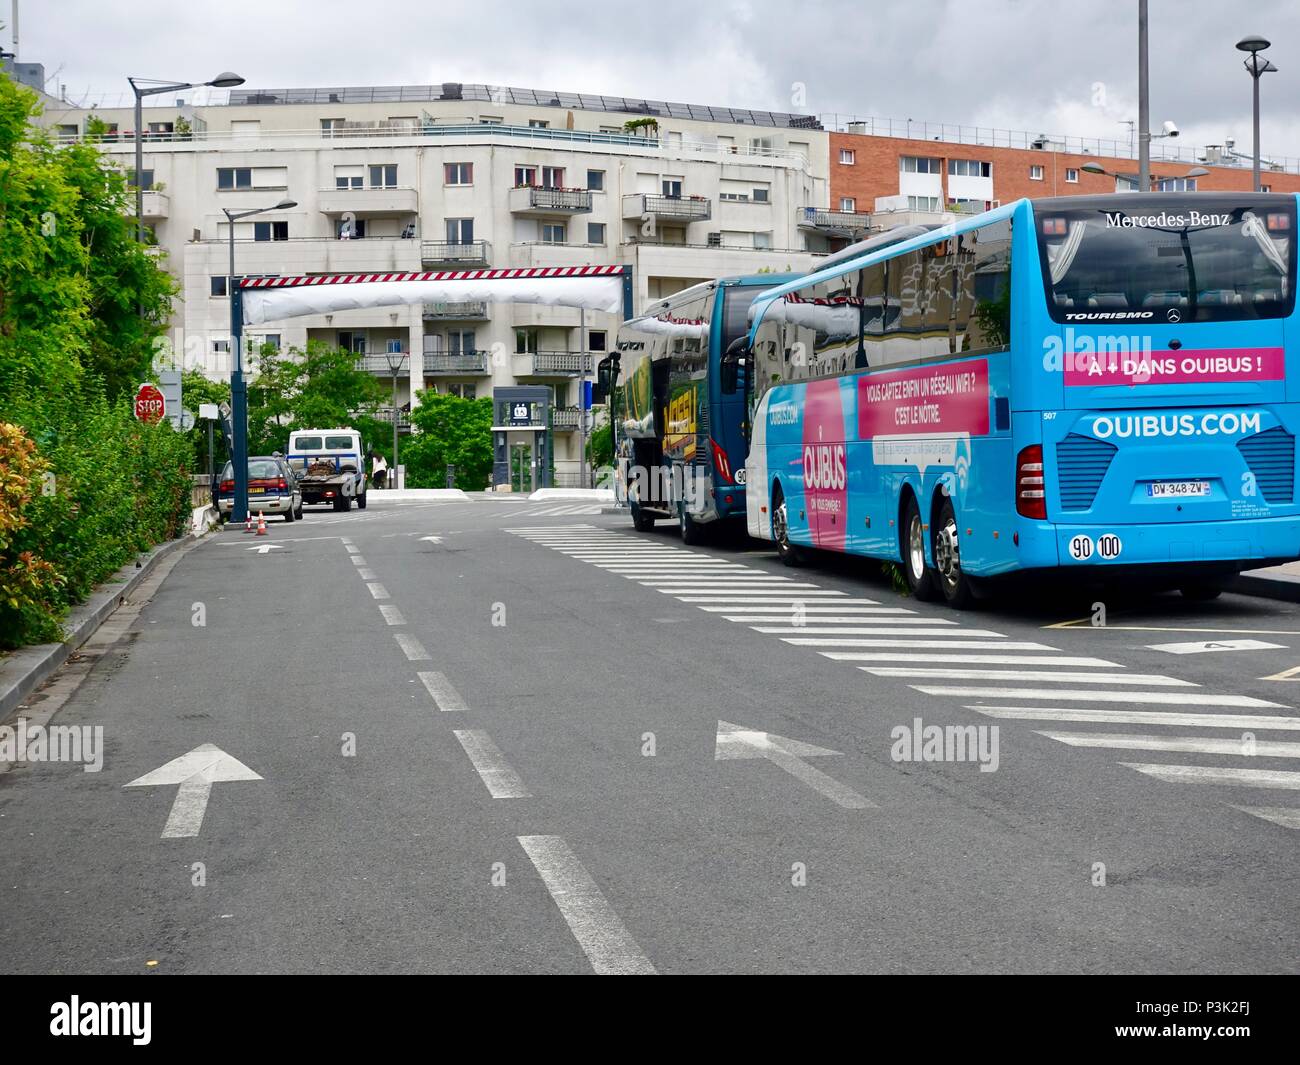 More people taking buses due to striking train workers. Buses lined up outside Gare de Bercy, the Bercy train and Oui bus station, Paris, France. Stock Photo